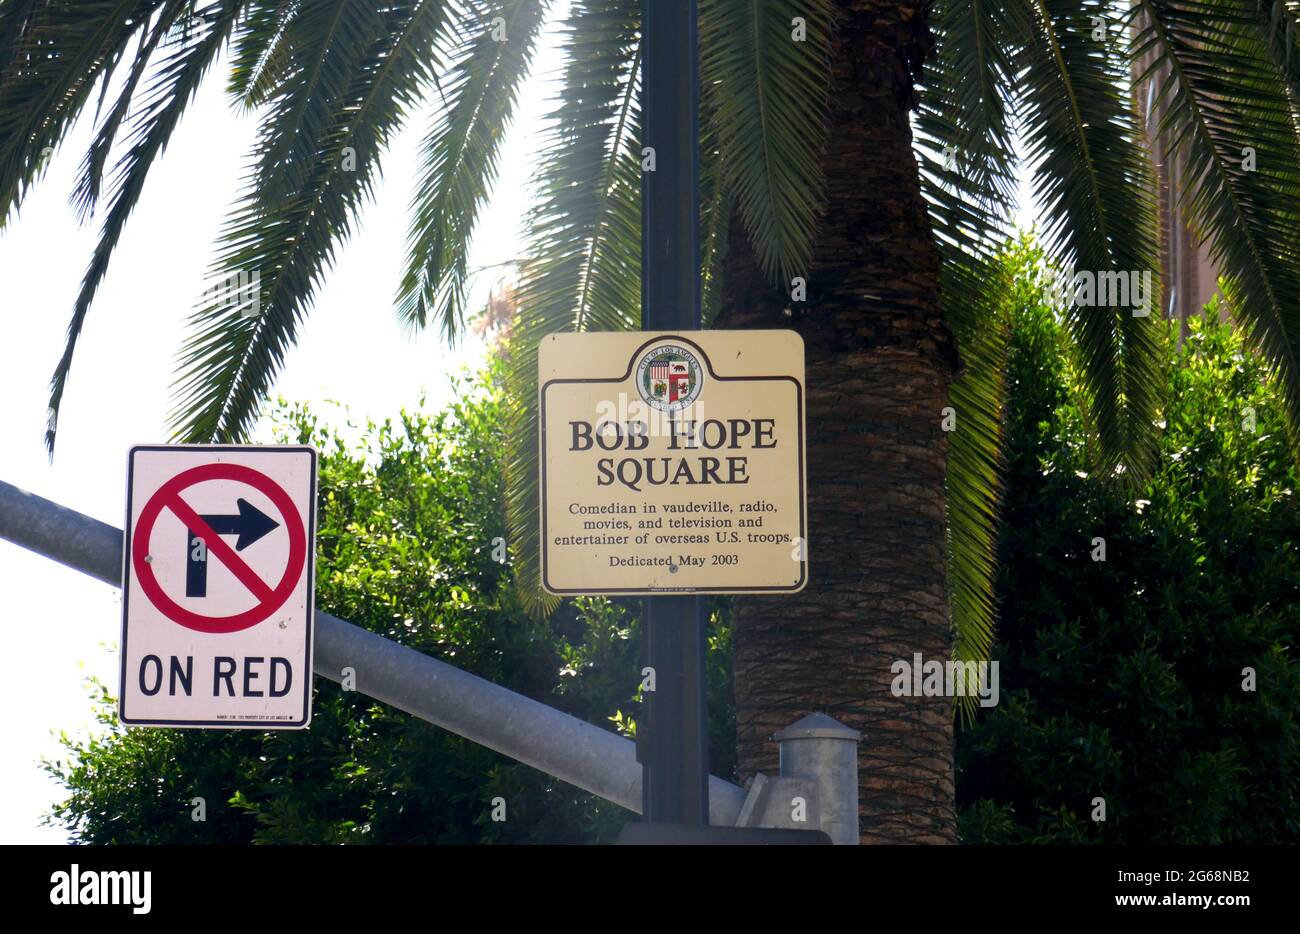 Los Angeles, California, USA 3rd July 2021 A general view of atmosphere Bob Hope Square Sign on Hollywood Blvd on July 3, 2021 in Los Angeles, California, USA. Photo by Barry King/Alamy Stock Photo Stock Photo